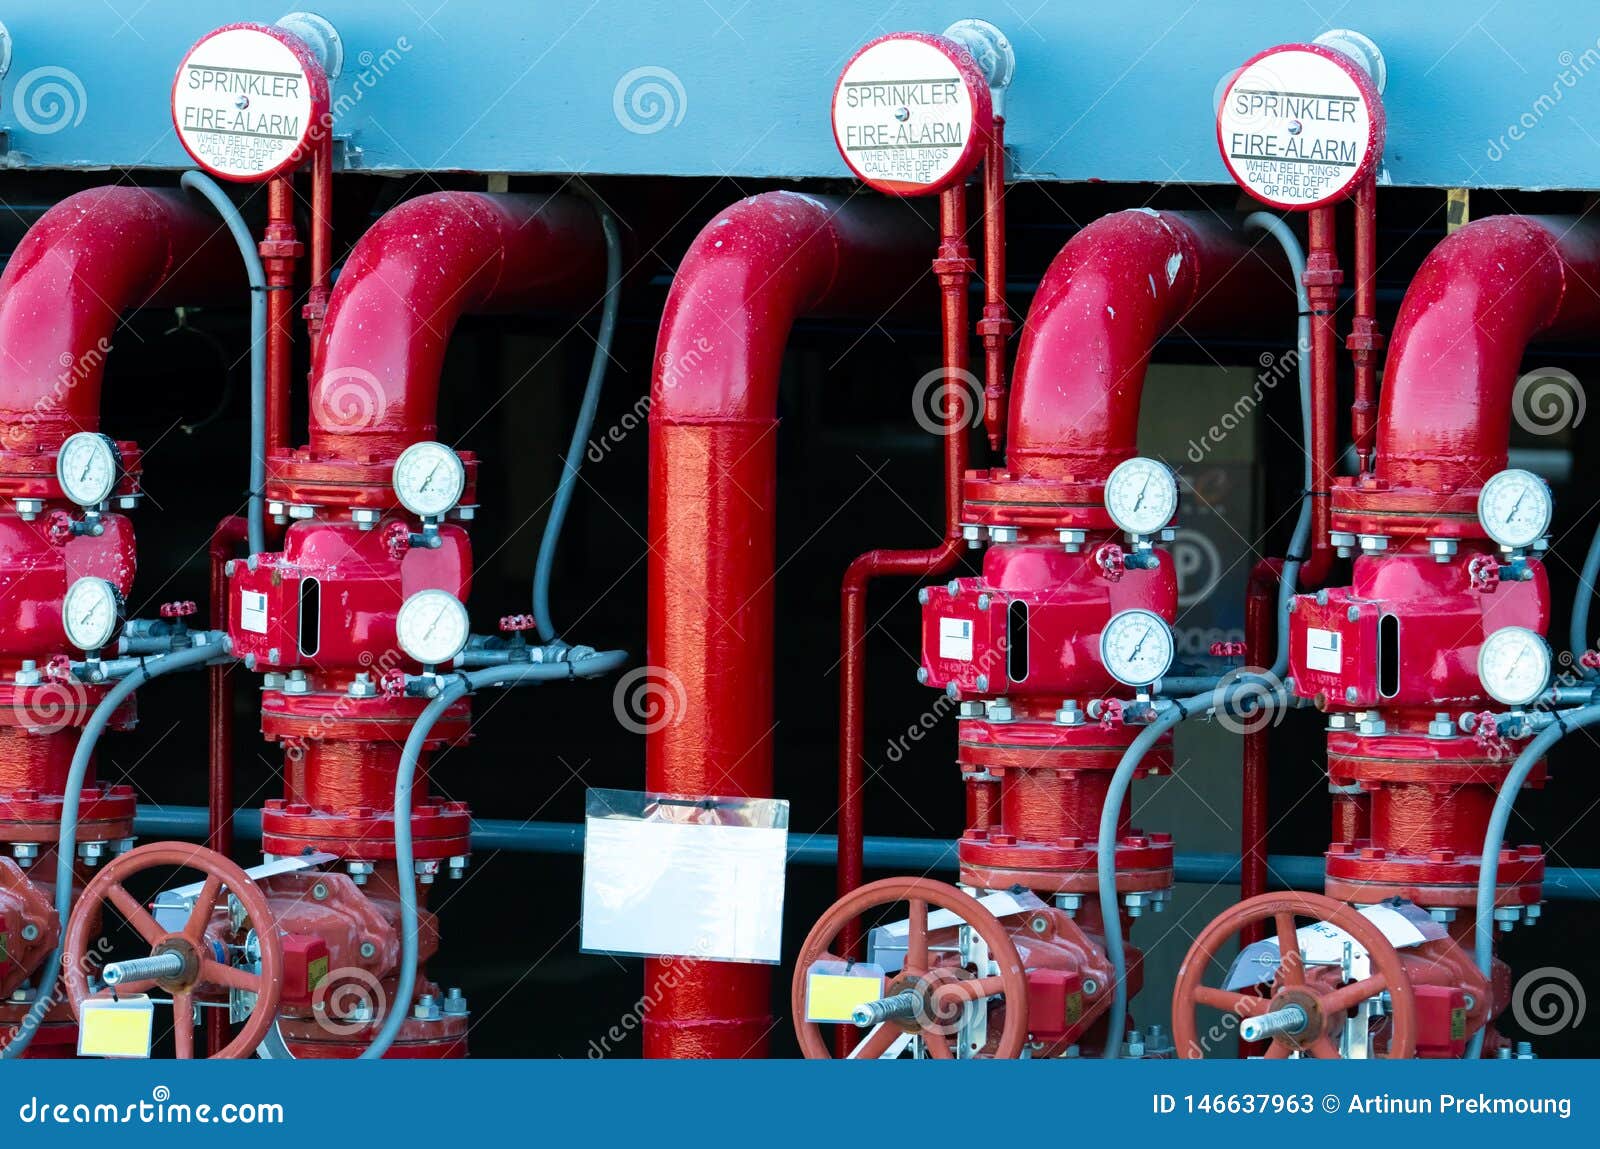 main supply water piping in the fire extinguishing system. fire sprinkler system with red pipes. fire suppression. manual valve